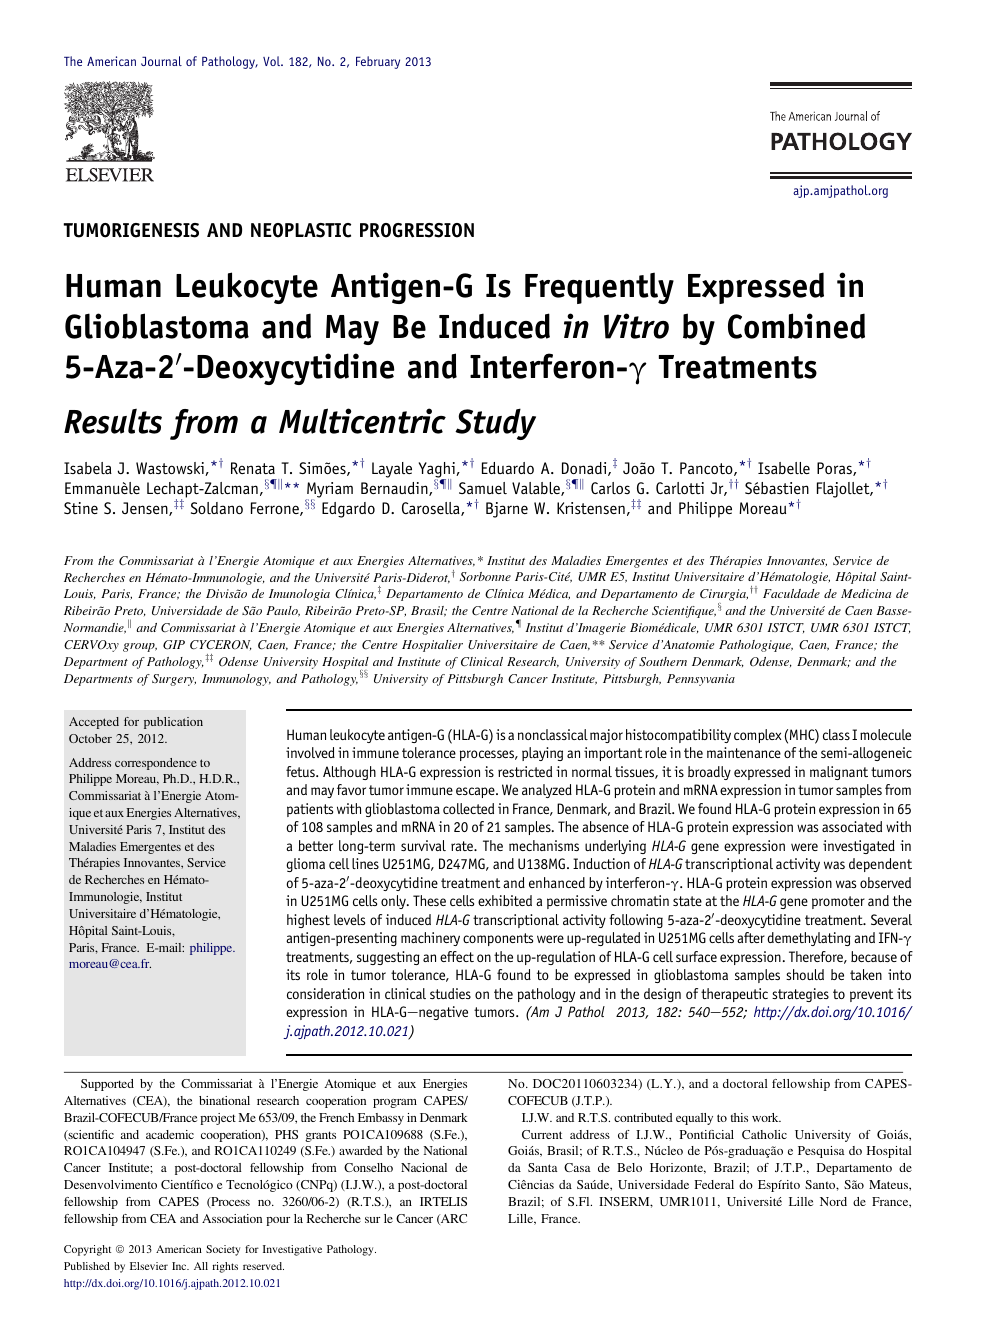 Human Leukocyte Antigen G Is Frequently Expressed In Glioblastoma And May Be Induced In Vitro By Combined 5 Aza 2 Deoxycytidine And Interferon G Treatments Topic Of Research Paper In Biological Sciences Download Scholarly Article Pdf